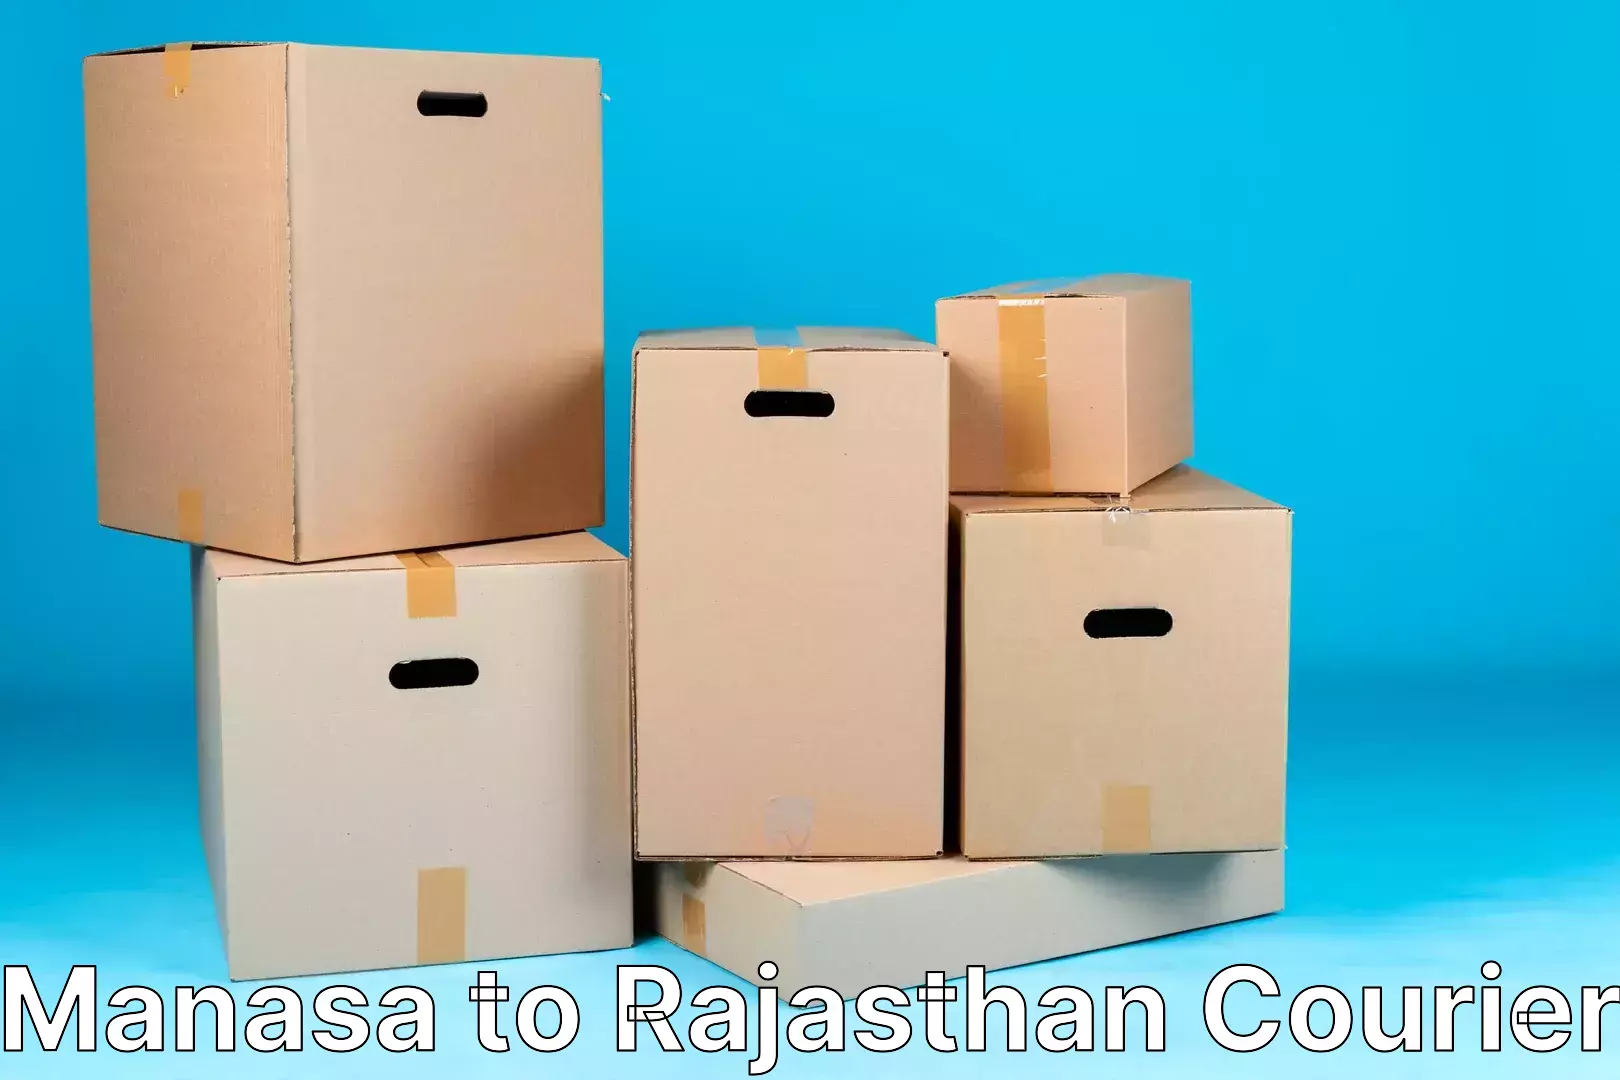 Supply chain delivery in Manasa to Rajasthan